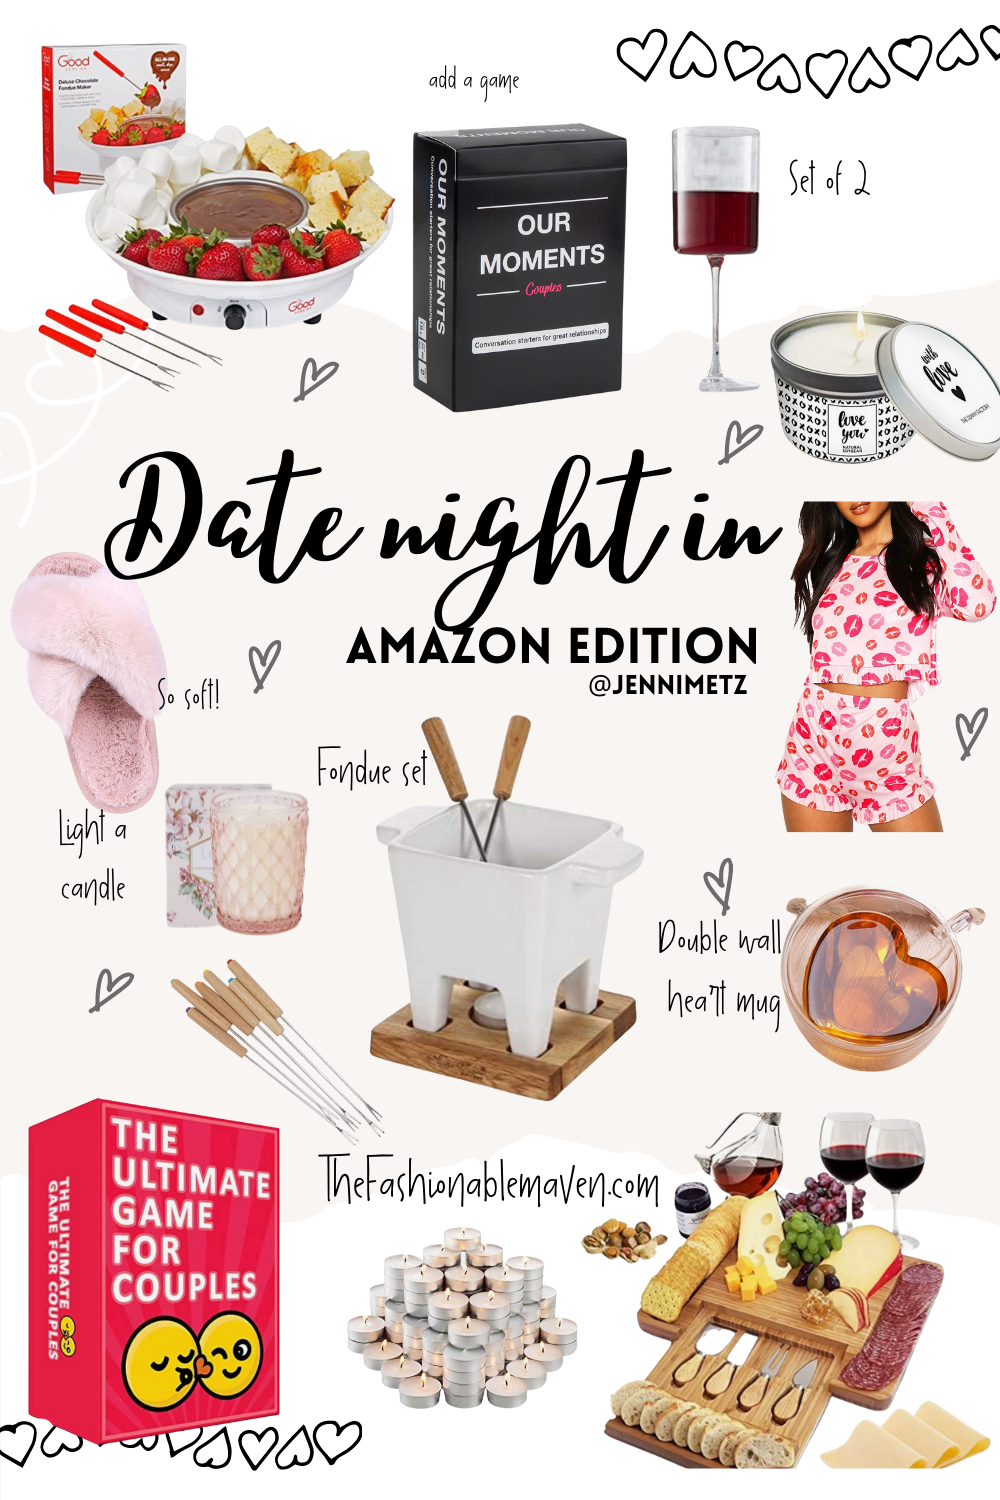 At home Date night Ideas to keep connected - The Fashionable Maven